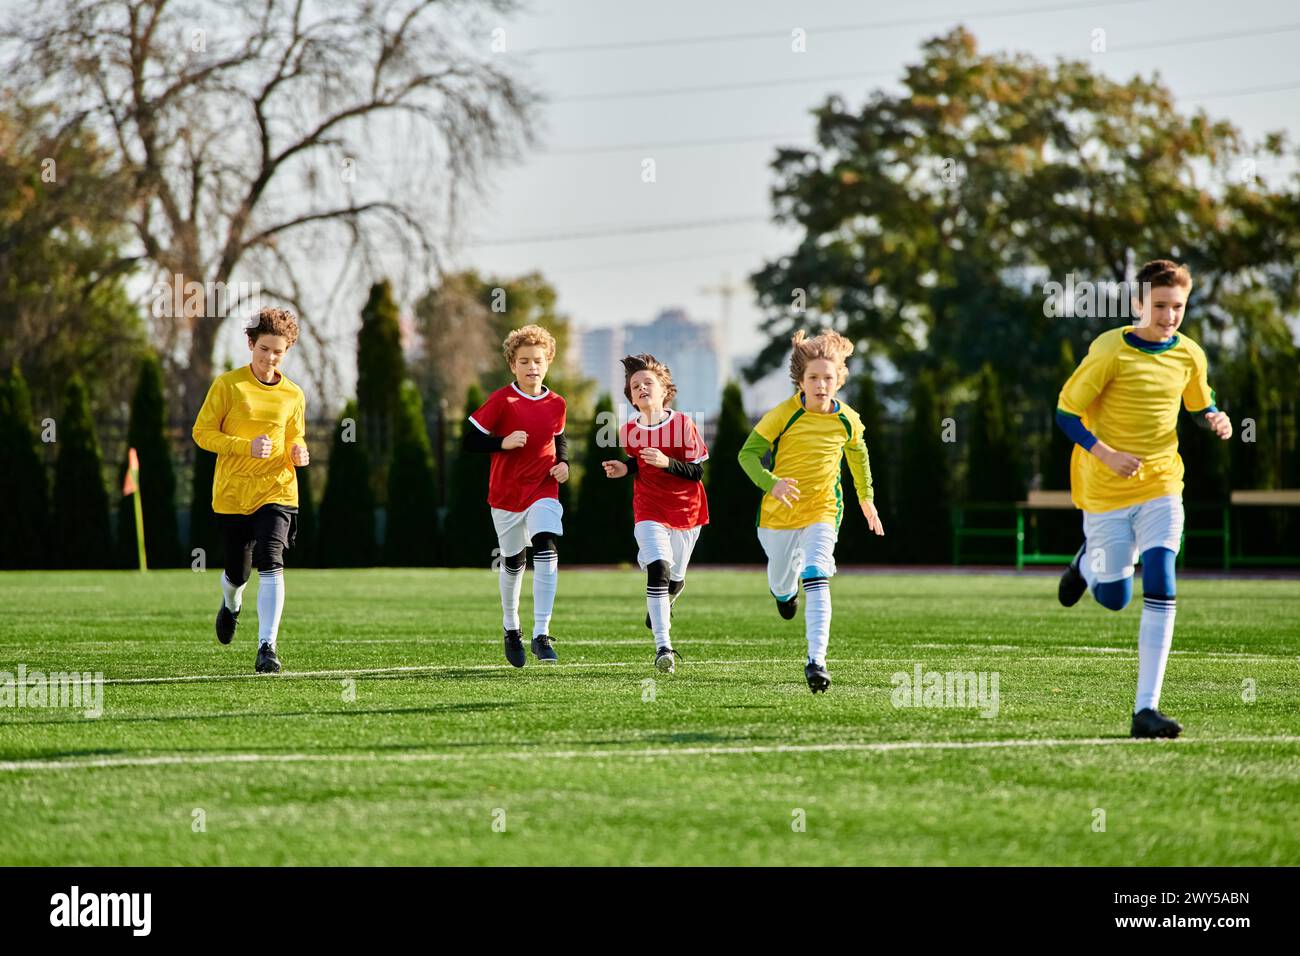 A group of diverse young children, clad in colorful jerseys, play soccer on a sun-drenched field, kicking the ball, running and laughing in camaraderi Stock Photo